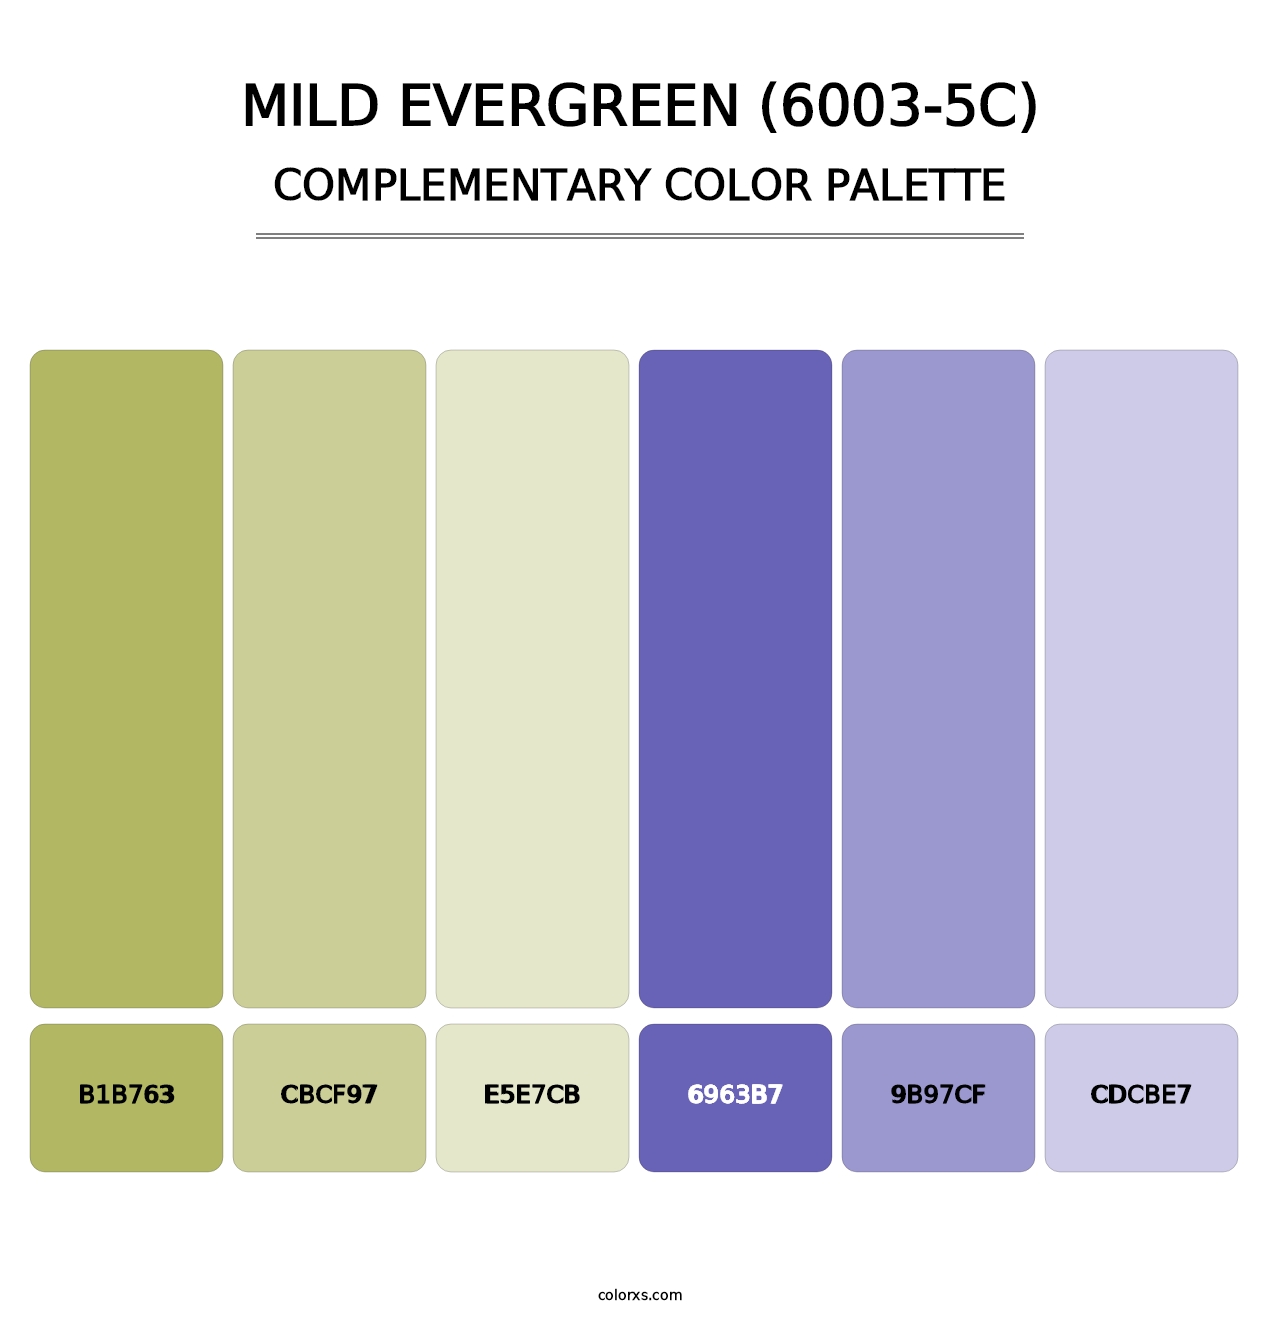 Mild Evergreen (6003-5C) - Complementary Color Palette